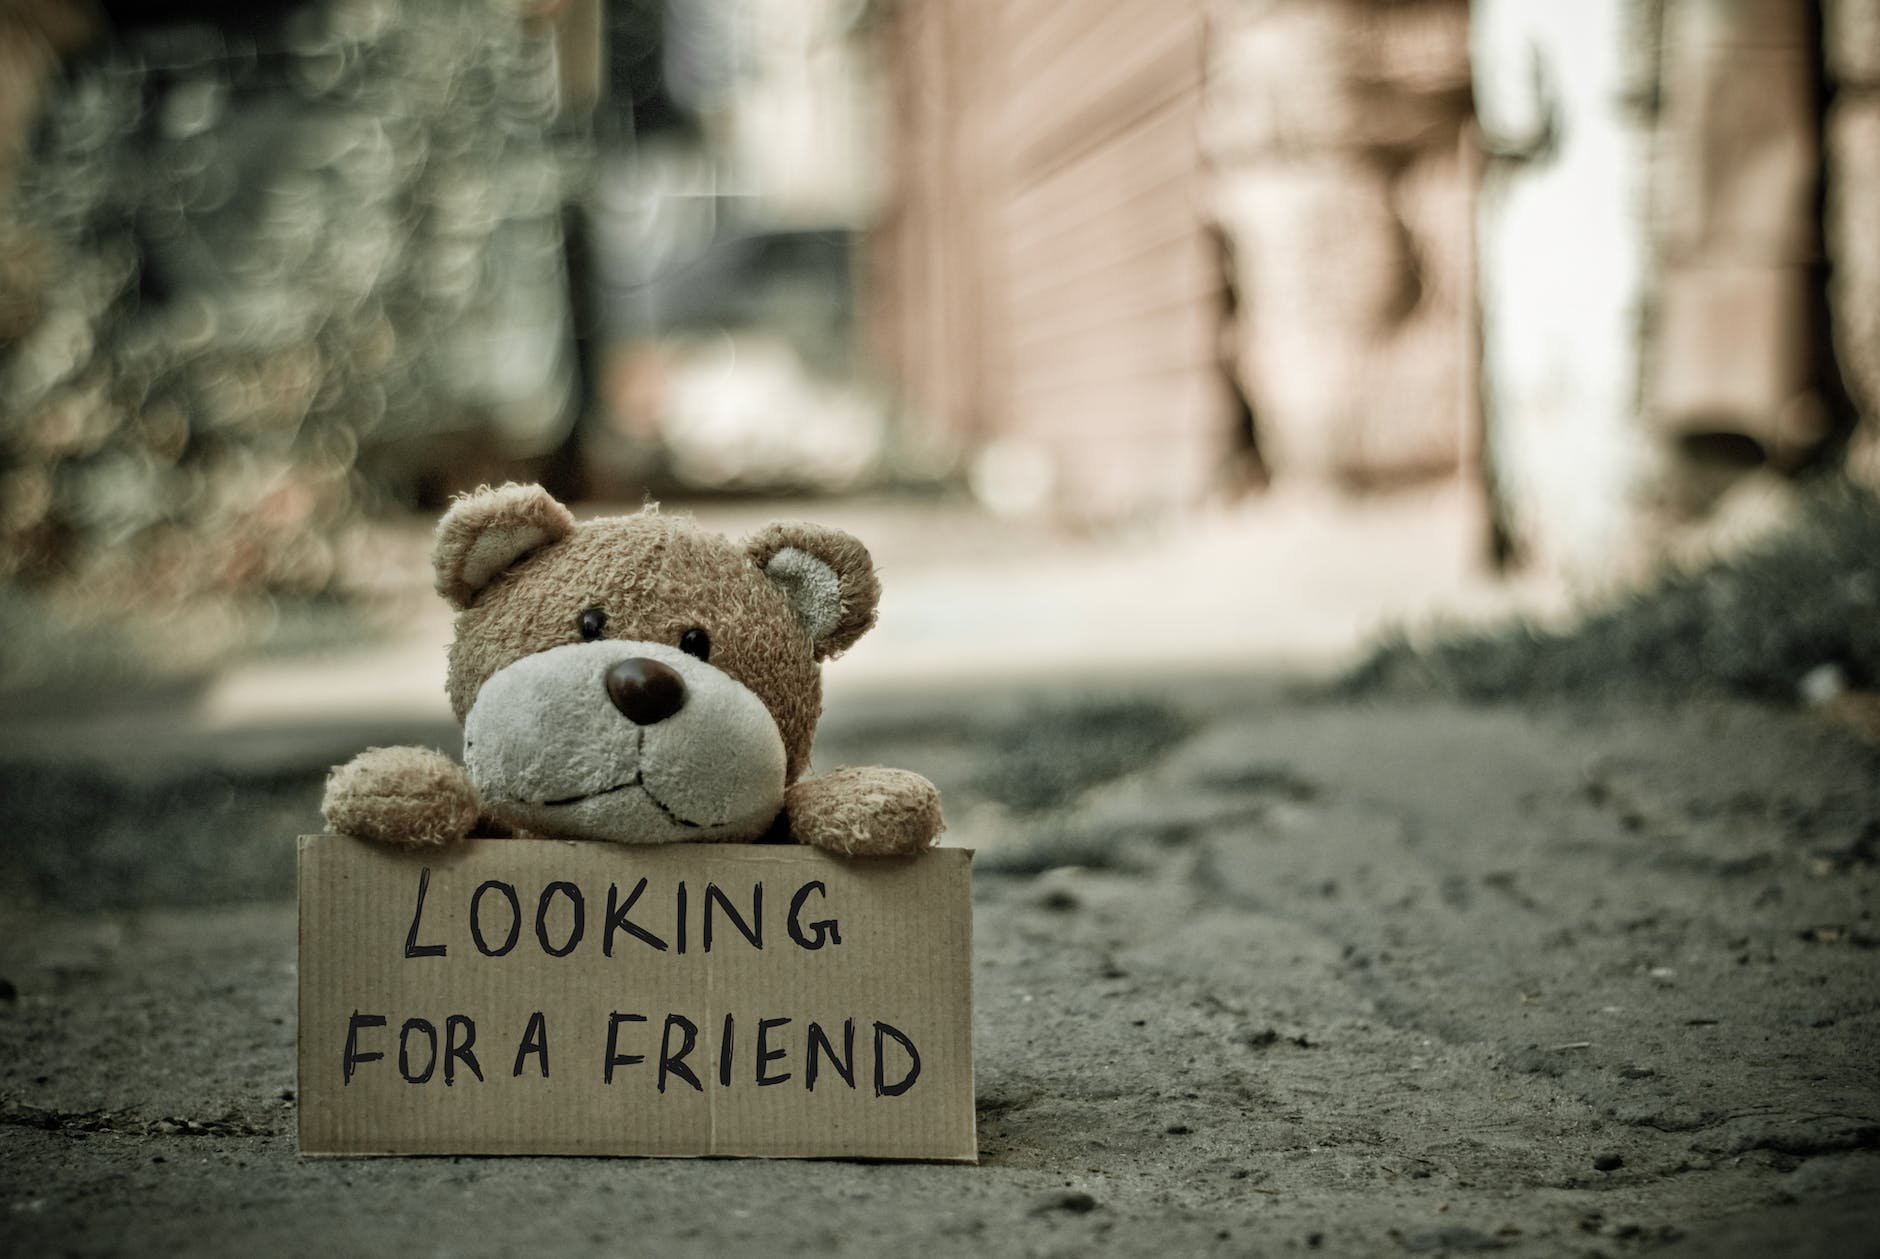 Teddy bear with sign that says looking for a friend